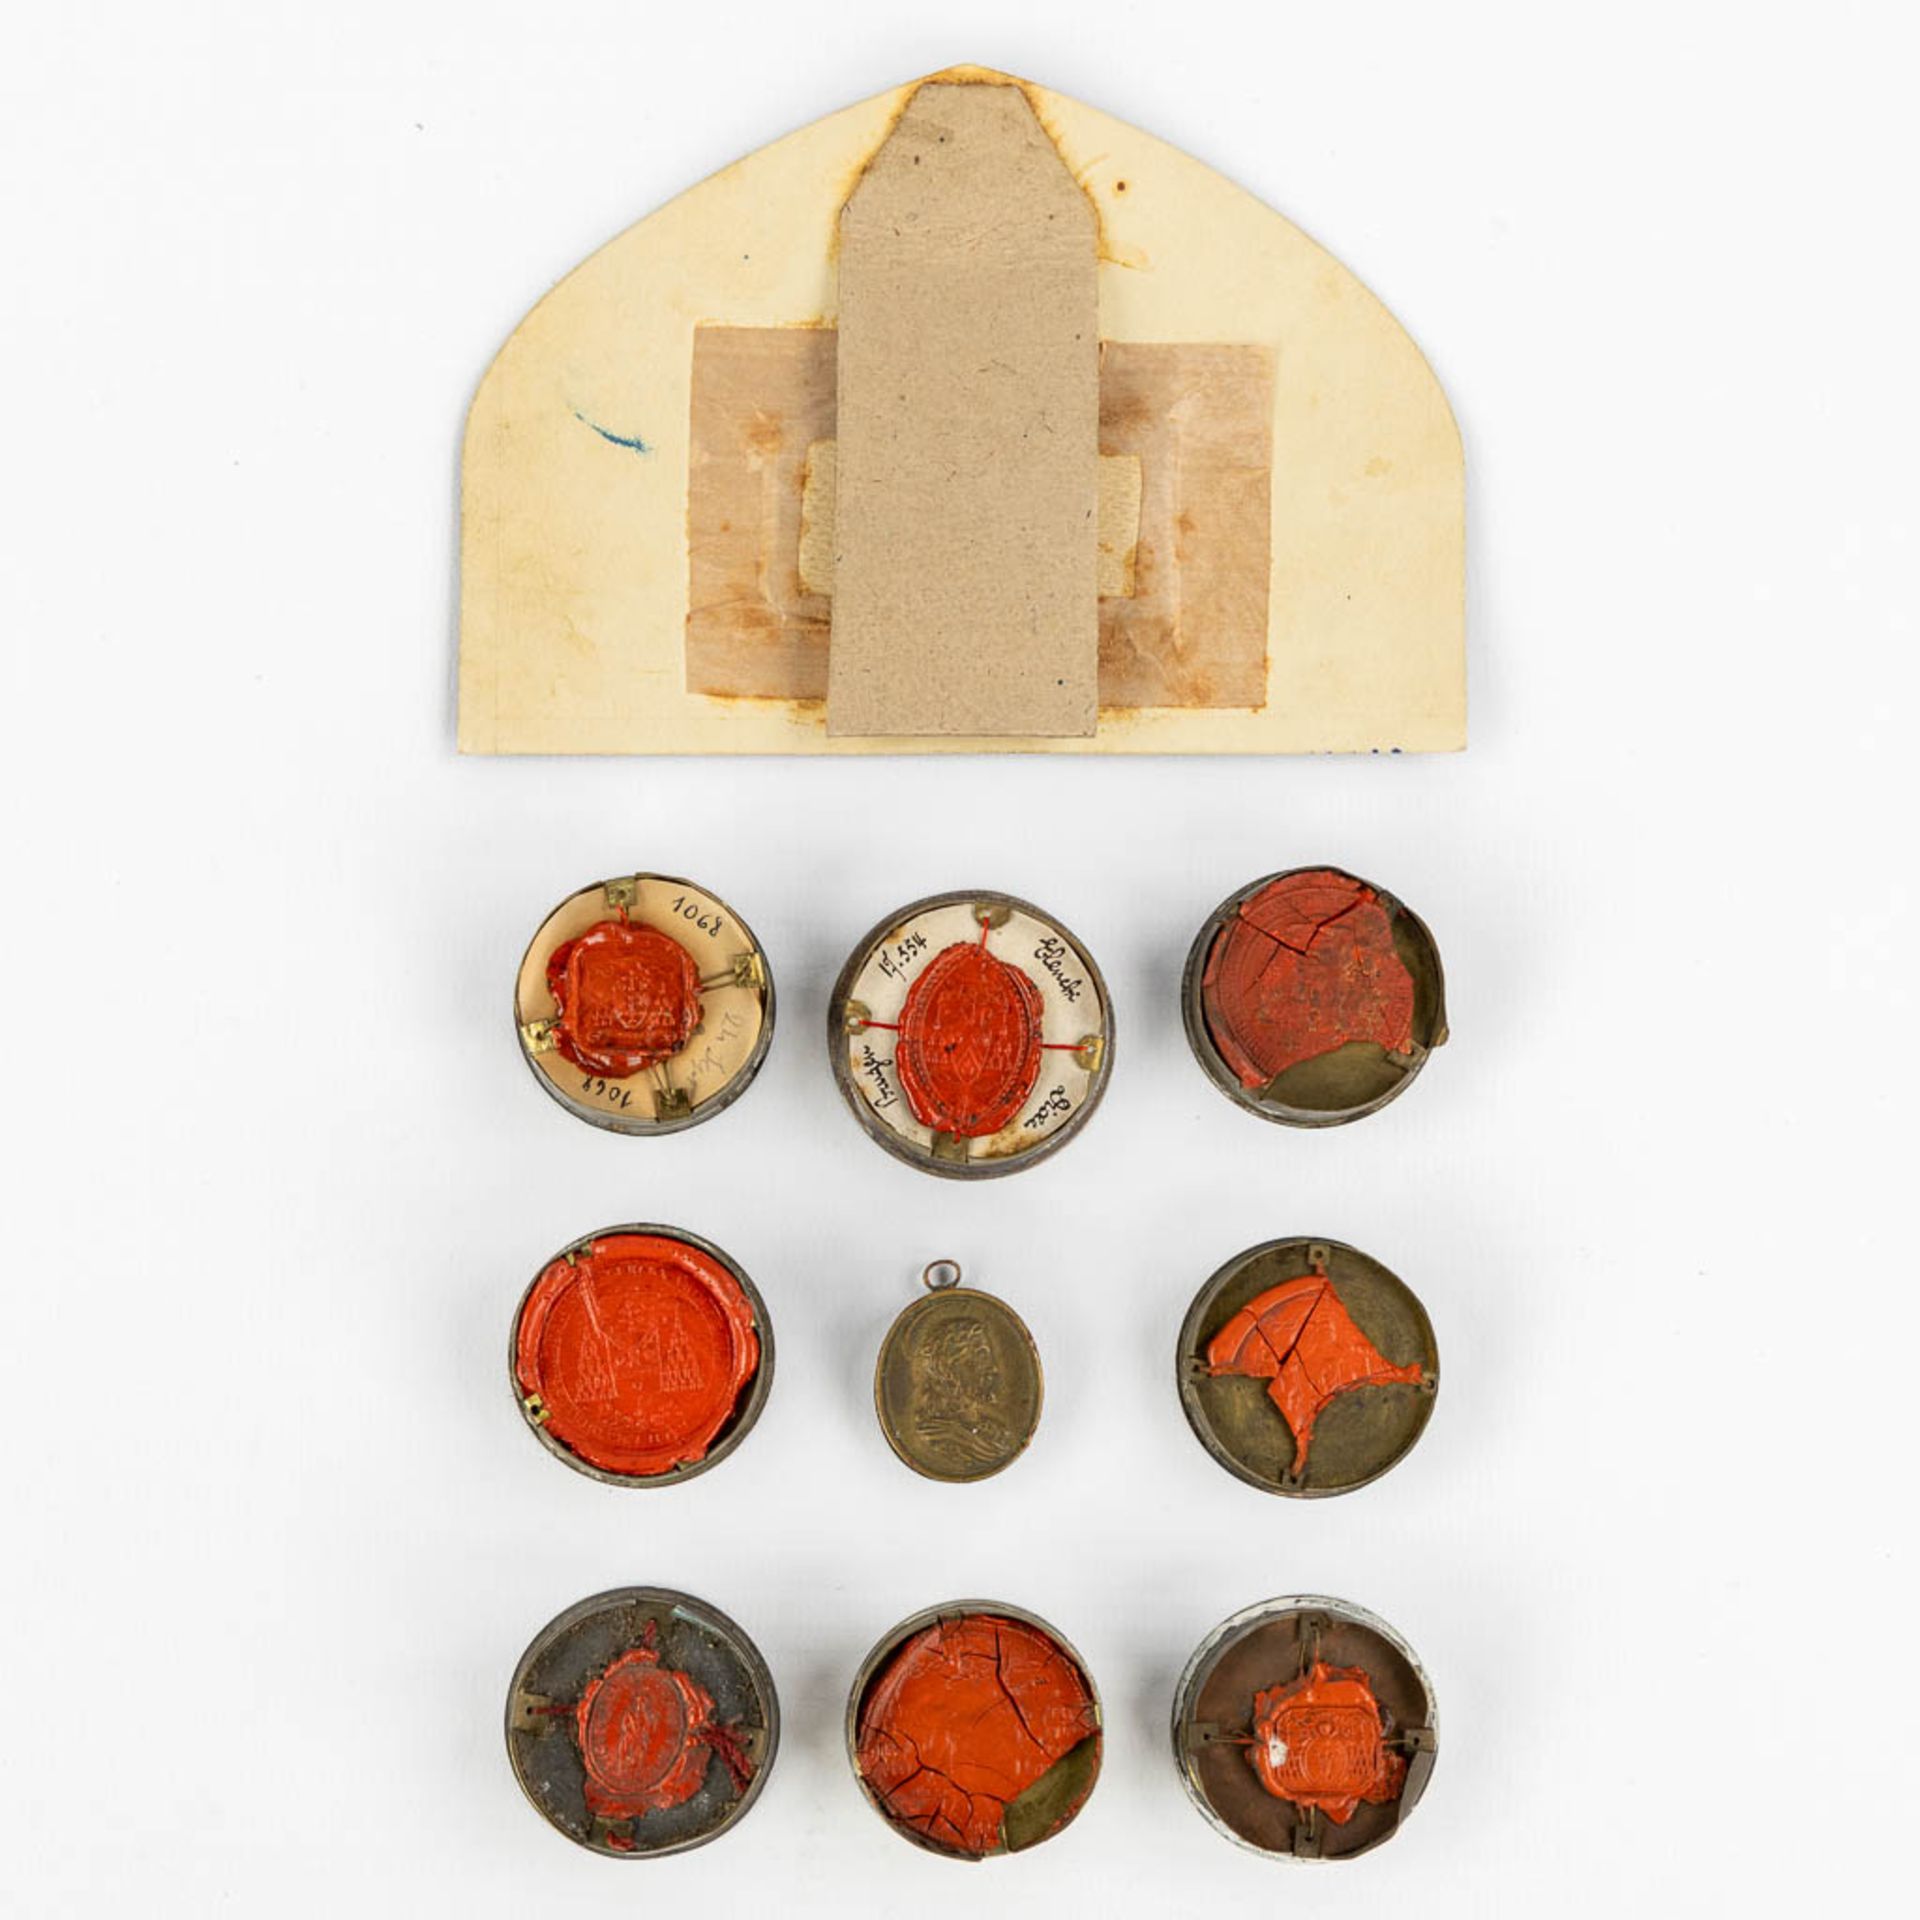 9 sealed theca with relics, and a sealed cardboard. Gerardi Major, Pauli à Cruce, Rumoldi Bishop, Jo - Image 14 of 14